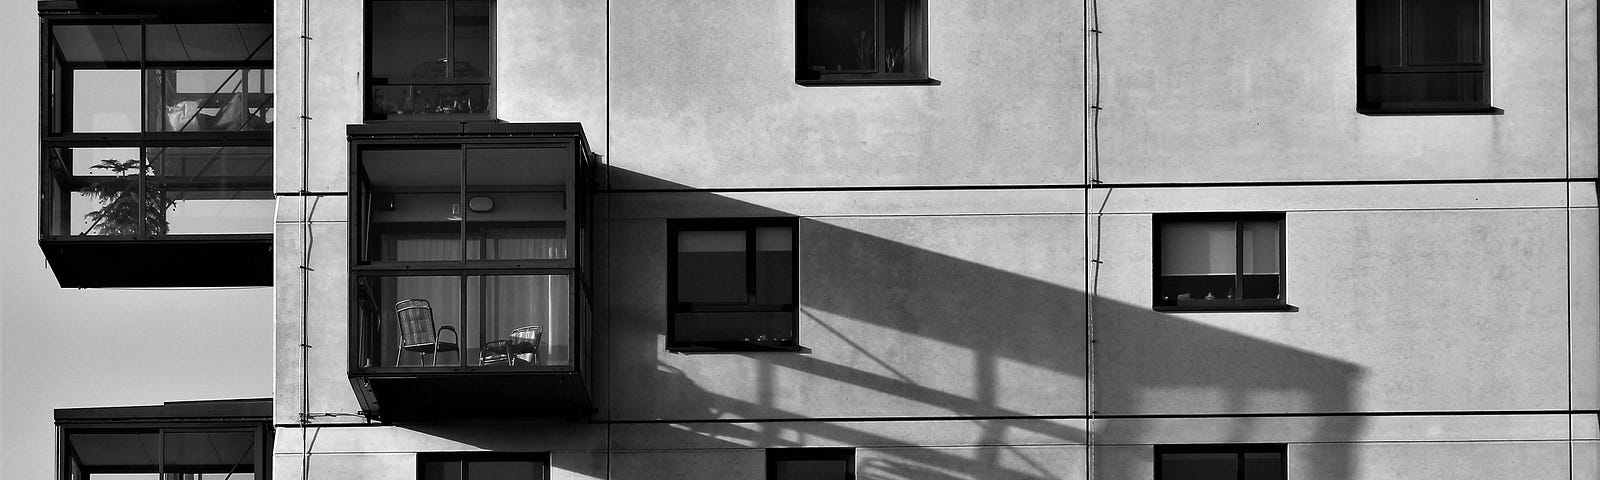 A grayscale photo of concrete building by hans middendorp from Pexels